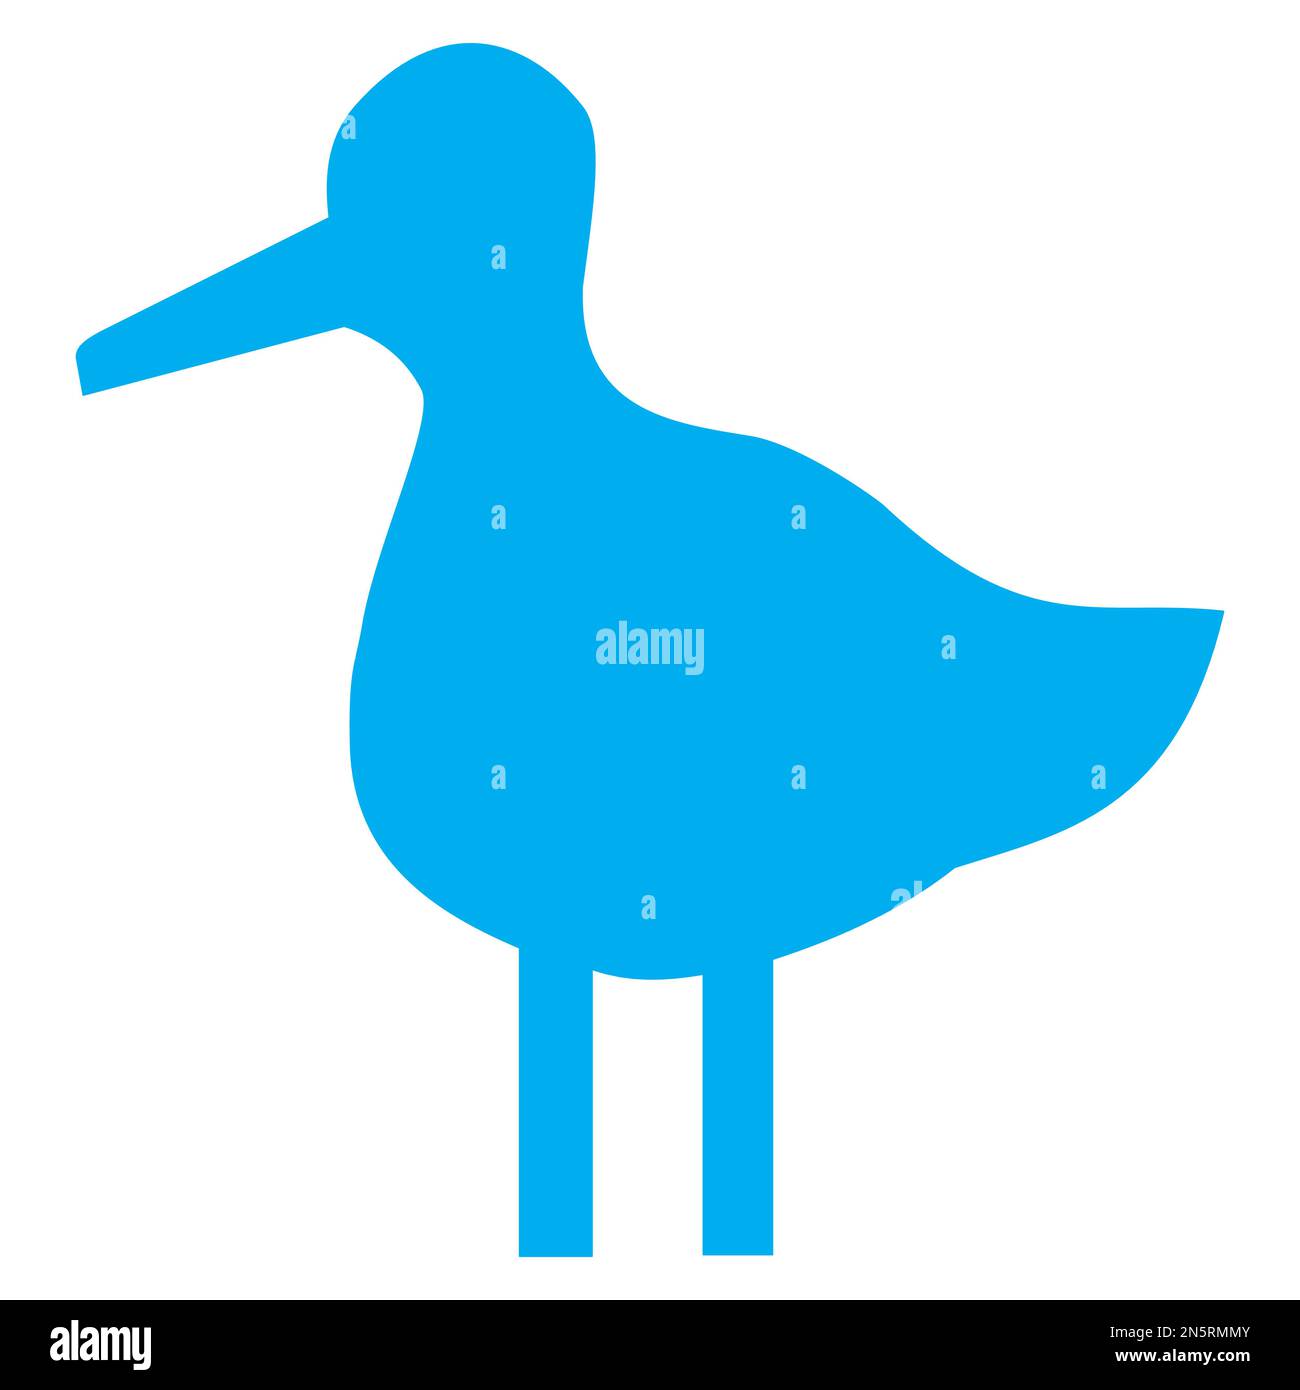 Blue and white vector graphic of a map symbol for a nature reserve. It shows a silhouette of a wading bird Stock Vector